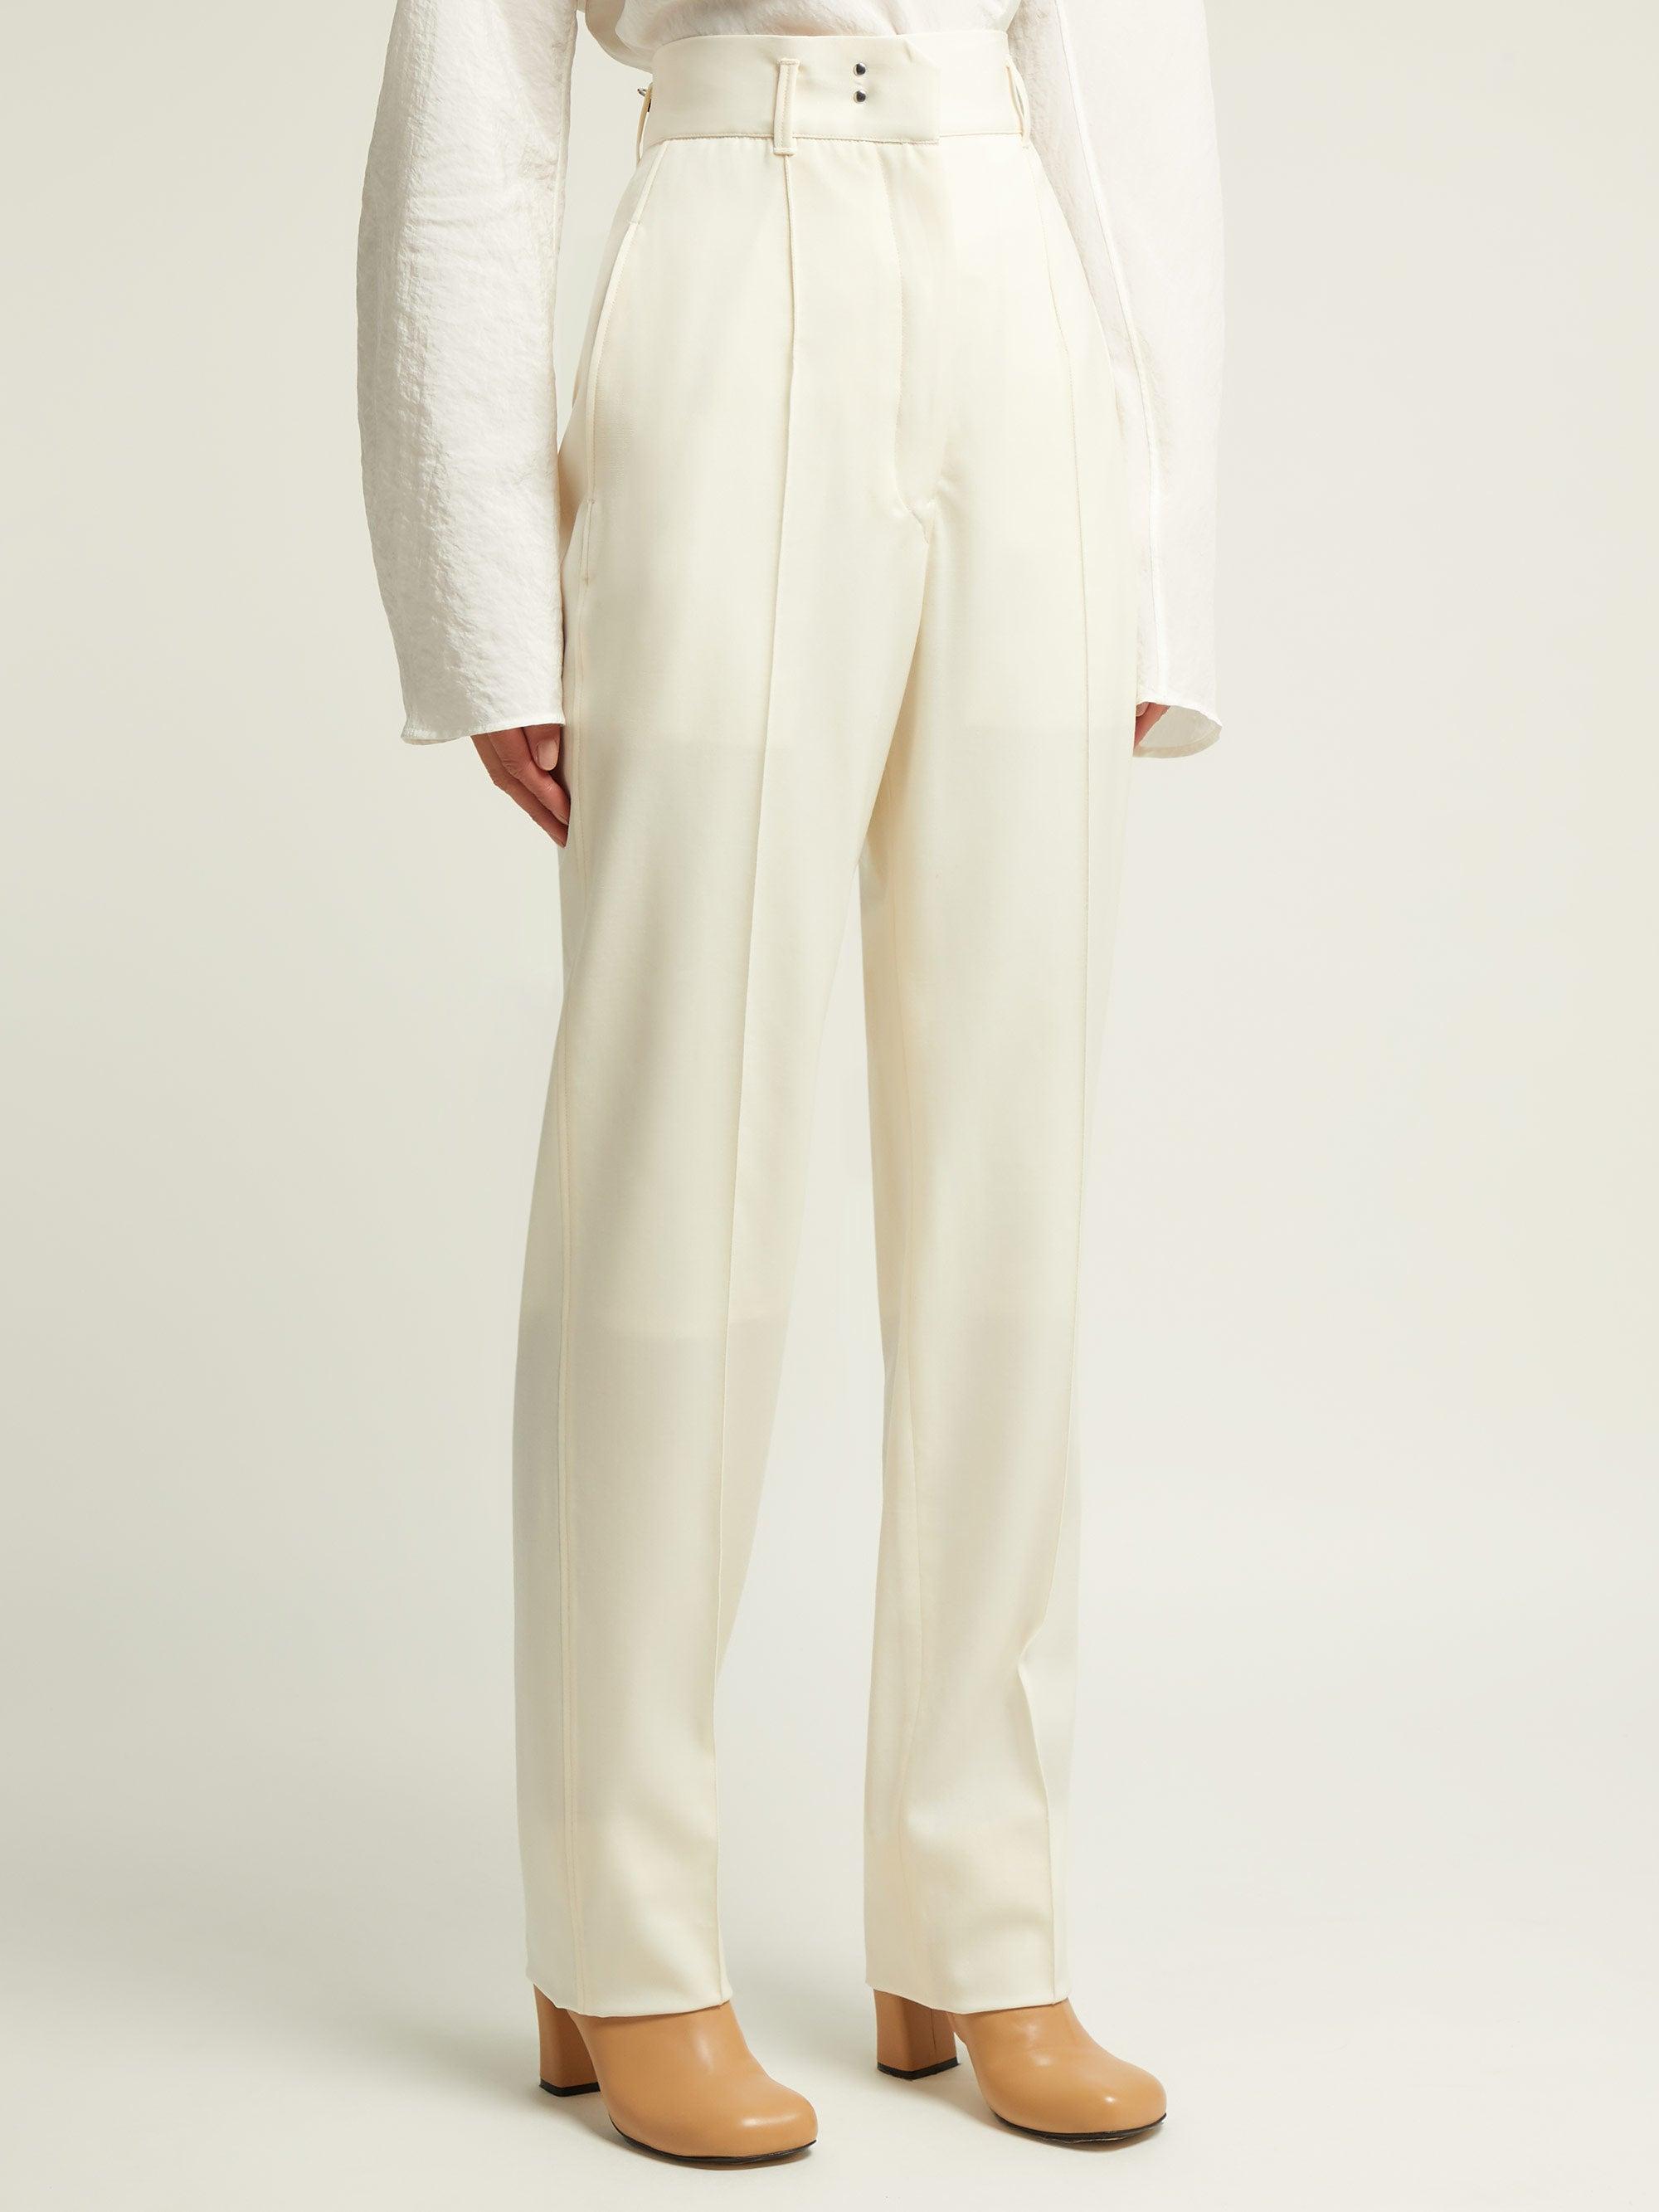 Lemaire High-waist Tailored Wool Trousers in Cream (Natural) - Lyst